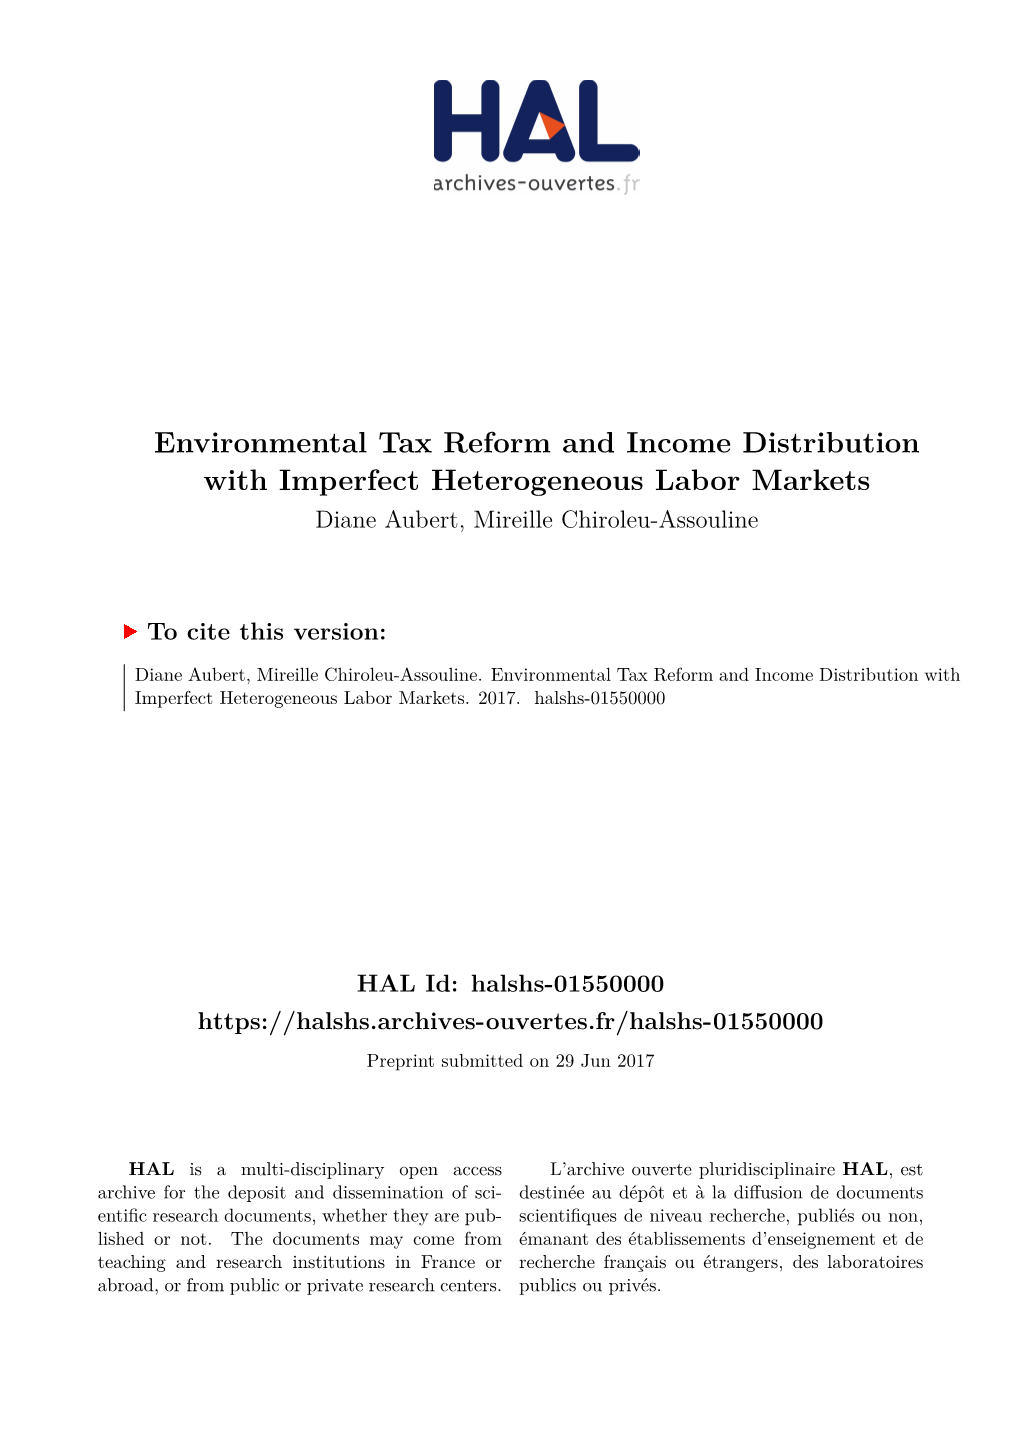 Environmental Tax Reform and Income Distribution with Imperfect Heterogeneous Labor Markets Diane Aubert, Mireille Chiroleu-Assouline